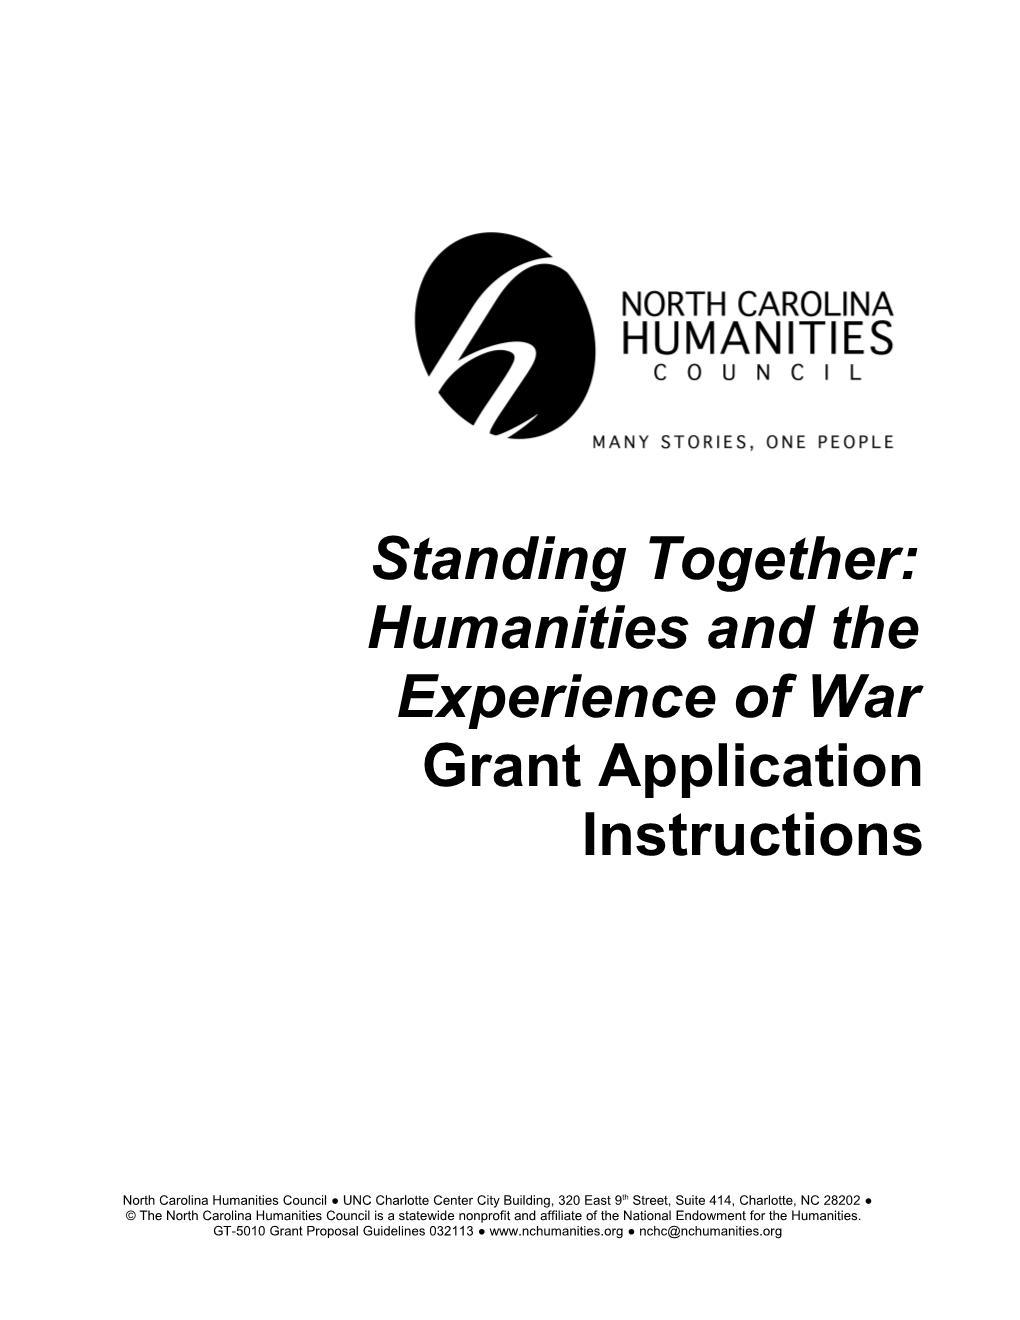 Standing Together: Humanities and the Experience of War